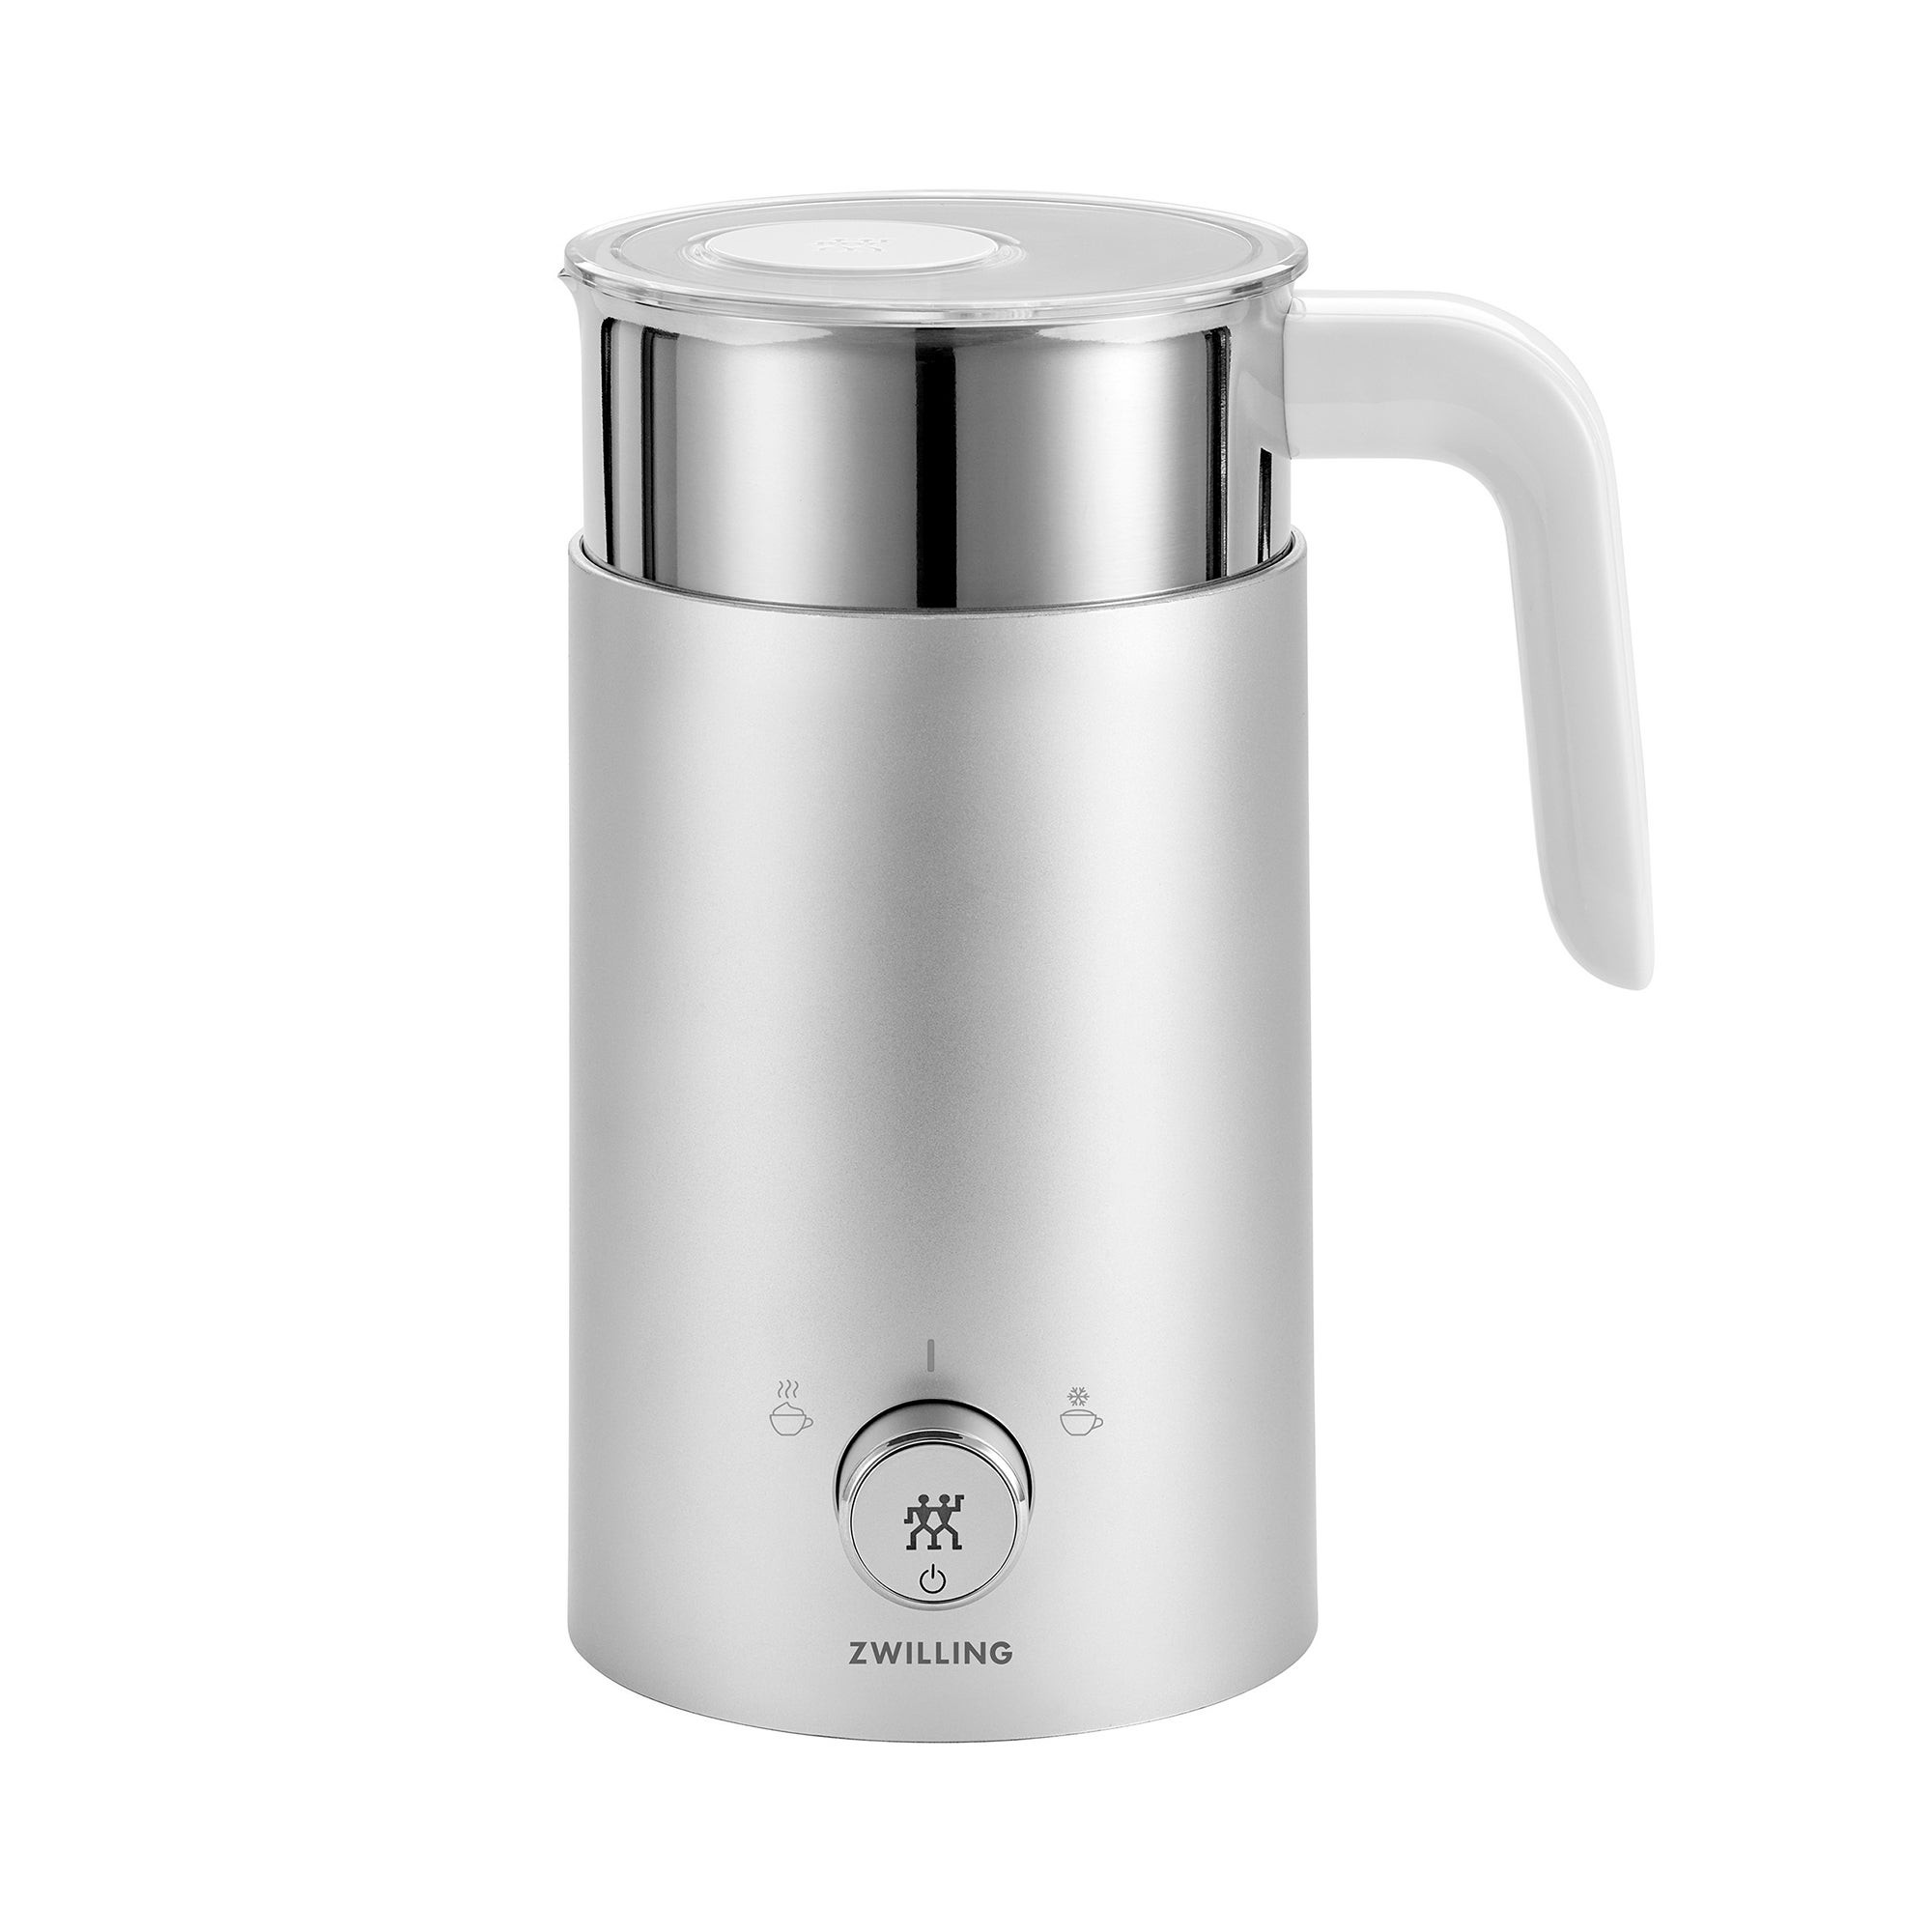 Enfinigy Milk Frother Silver